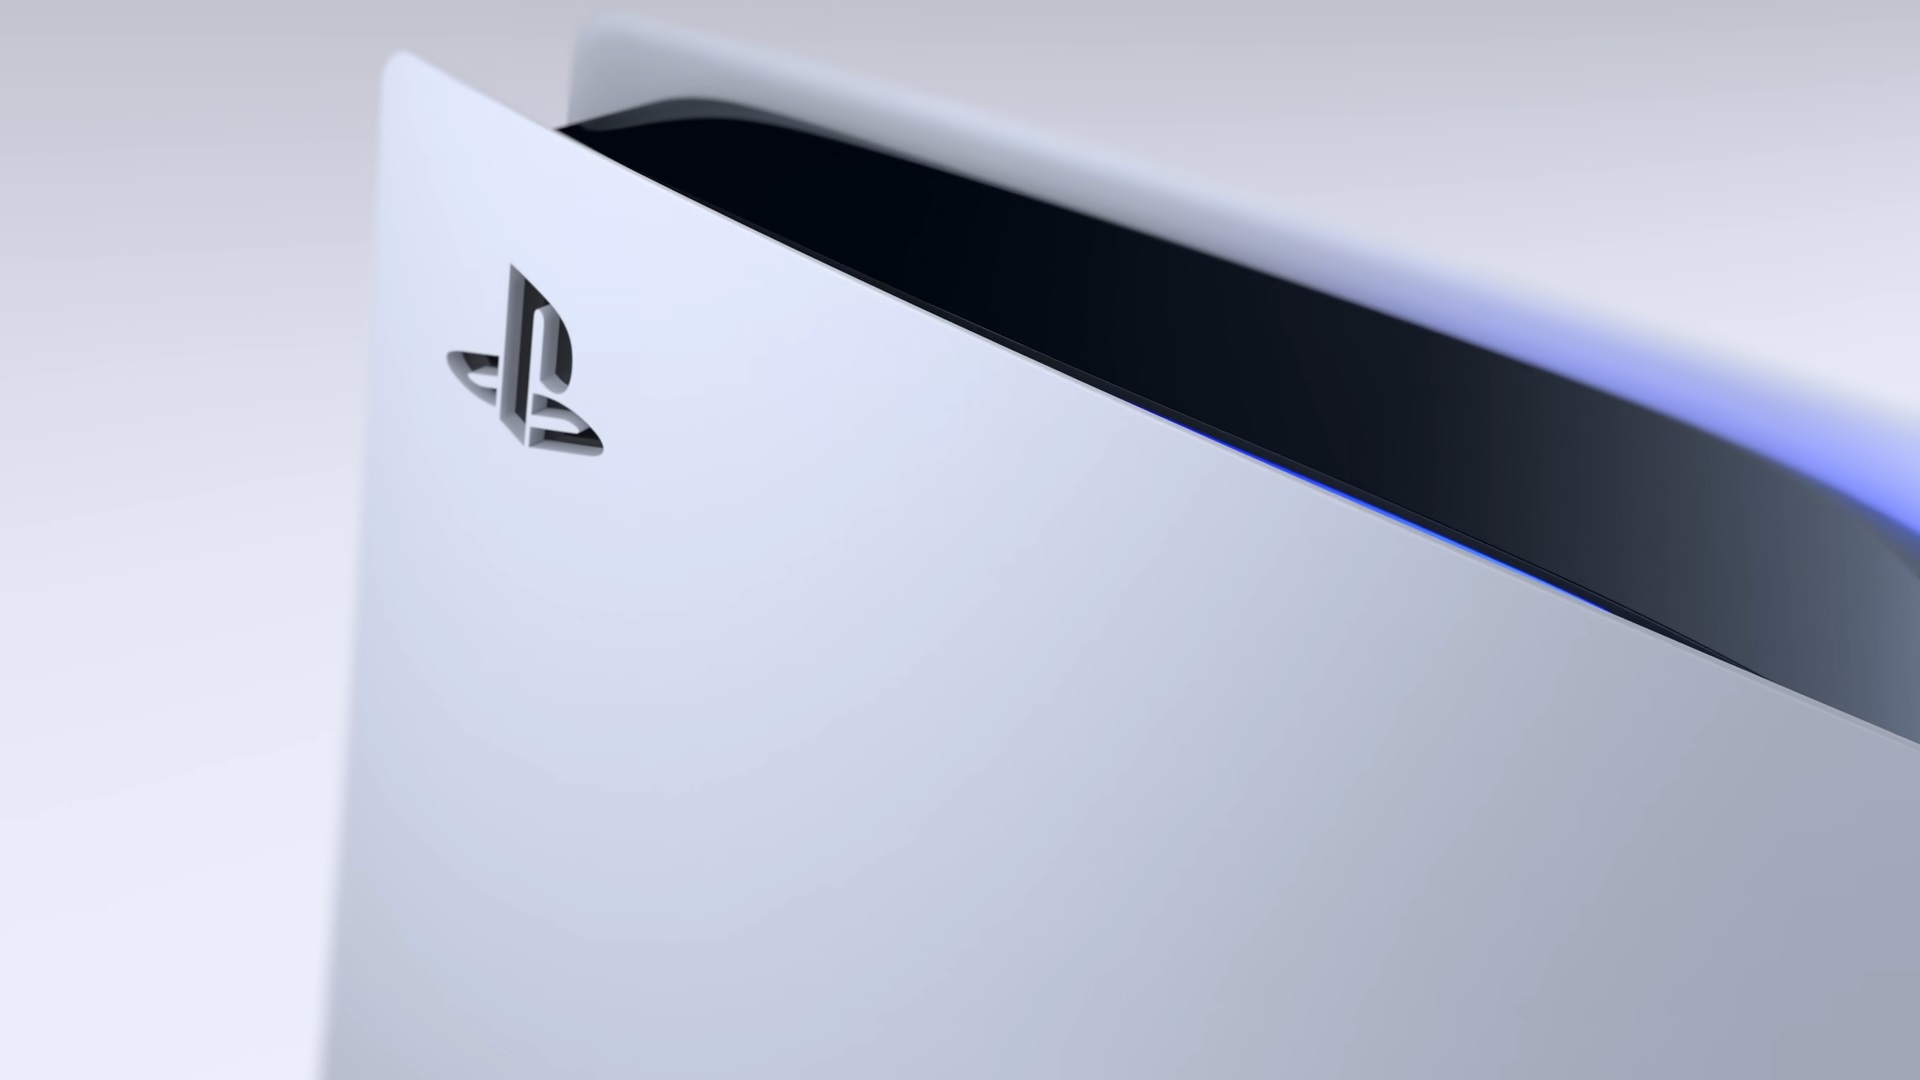 playstation 5 in stores